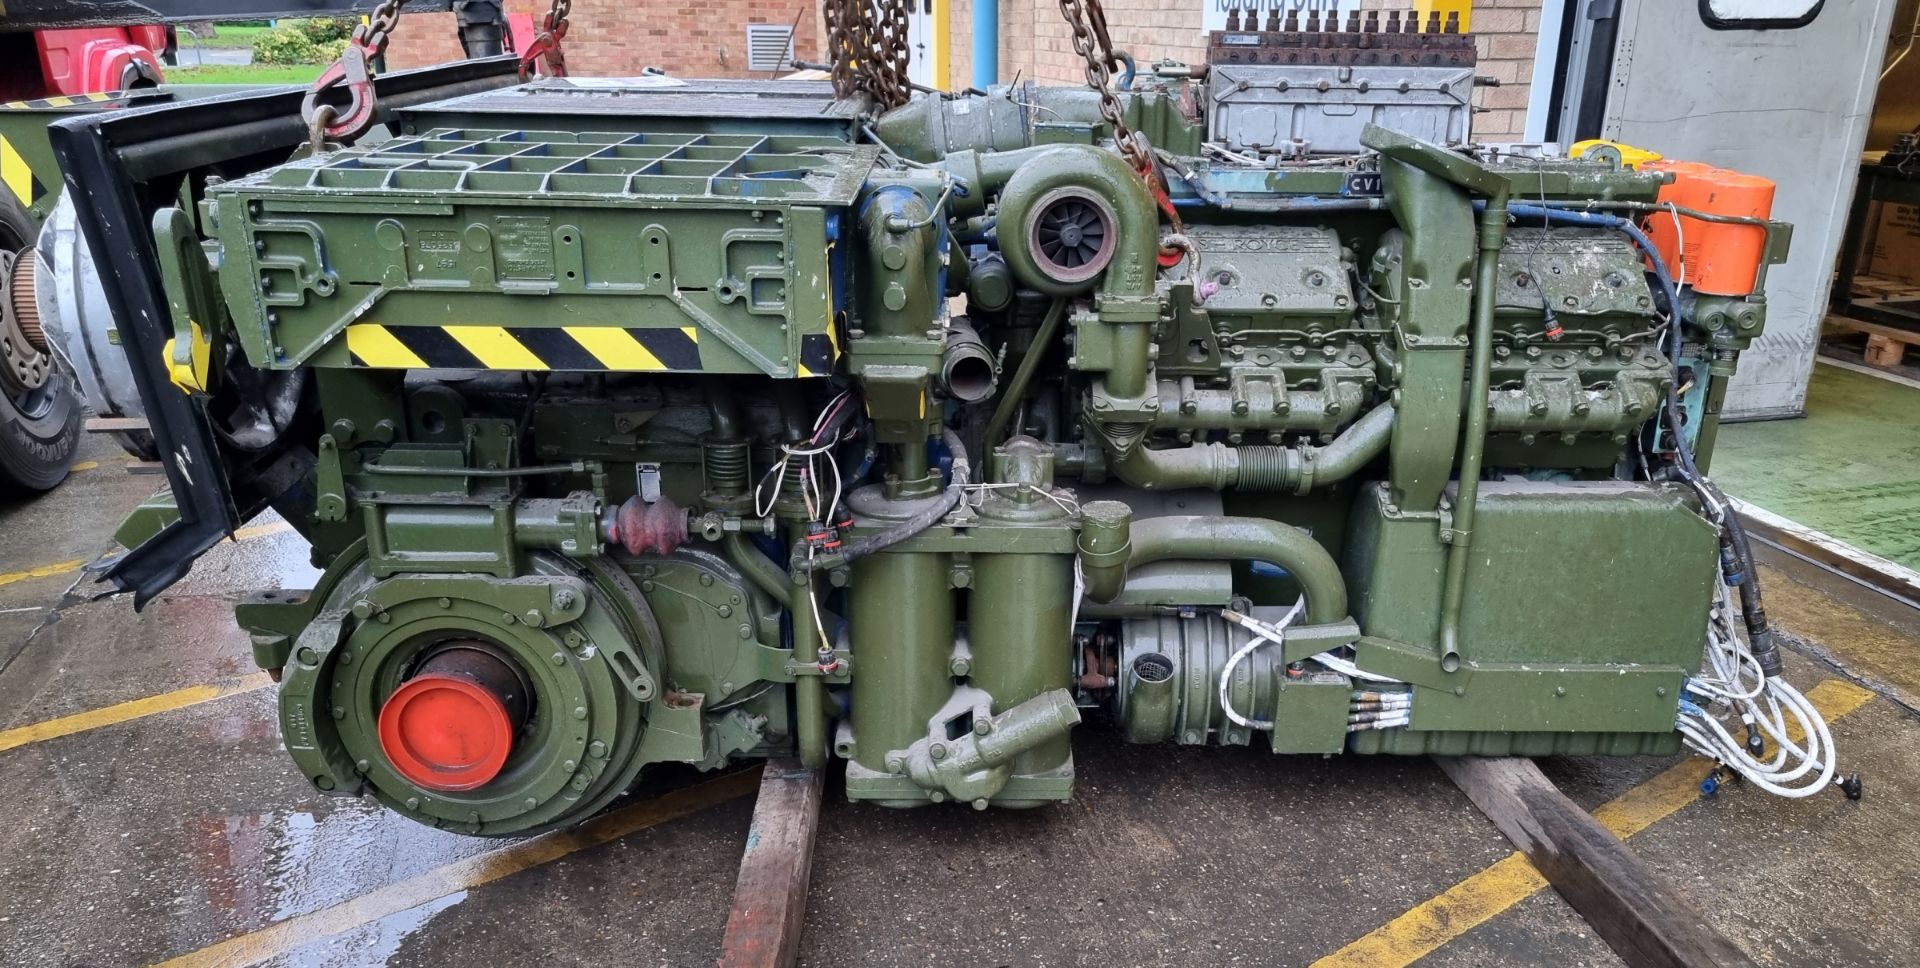 Challenger 2 tank engine Rolls Royce CV12 26 litre twin turbo diesel engine and transmission